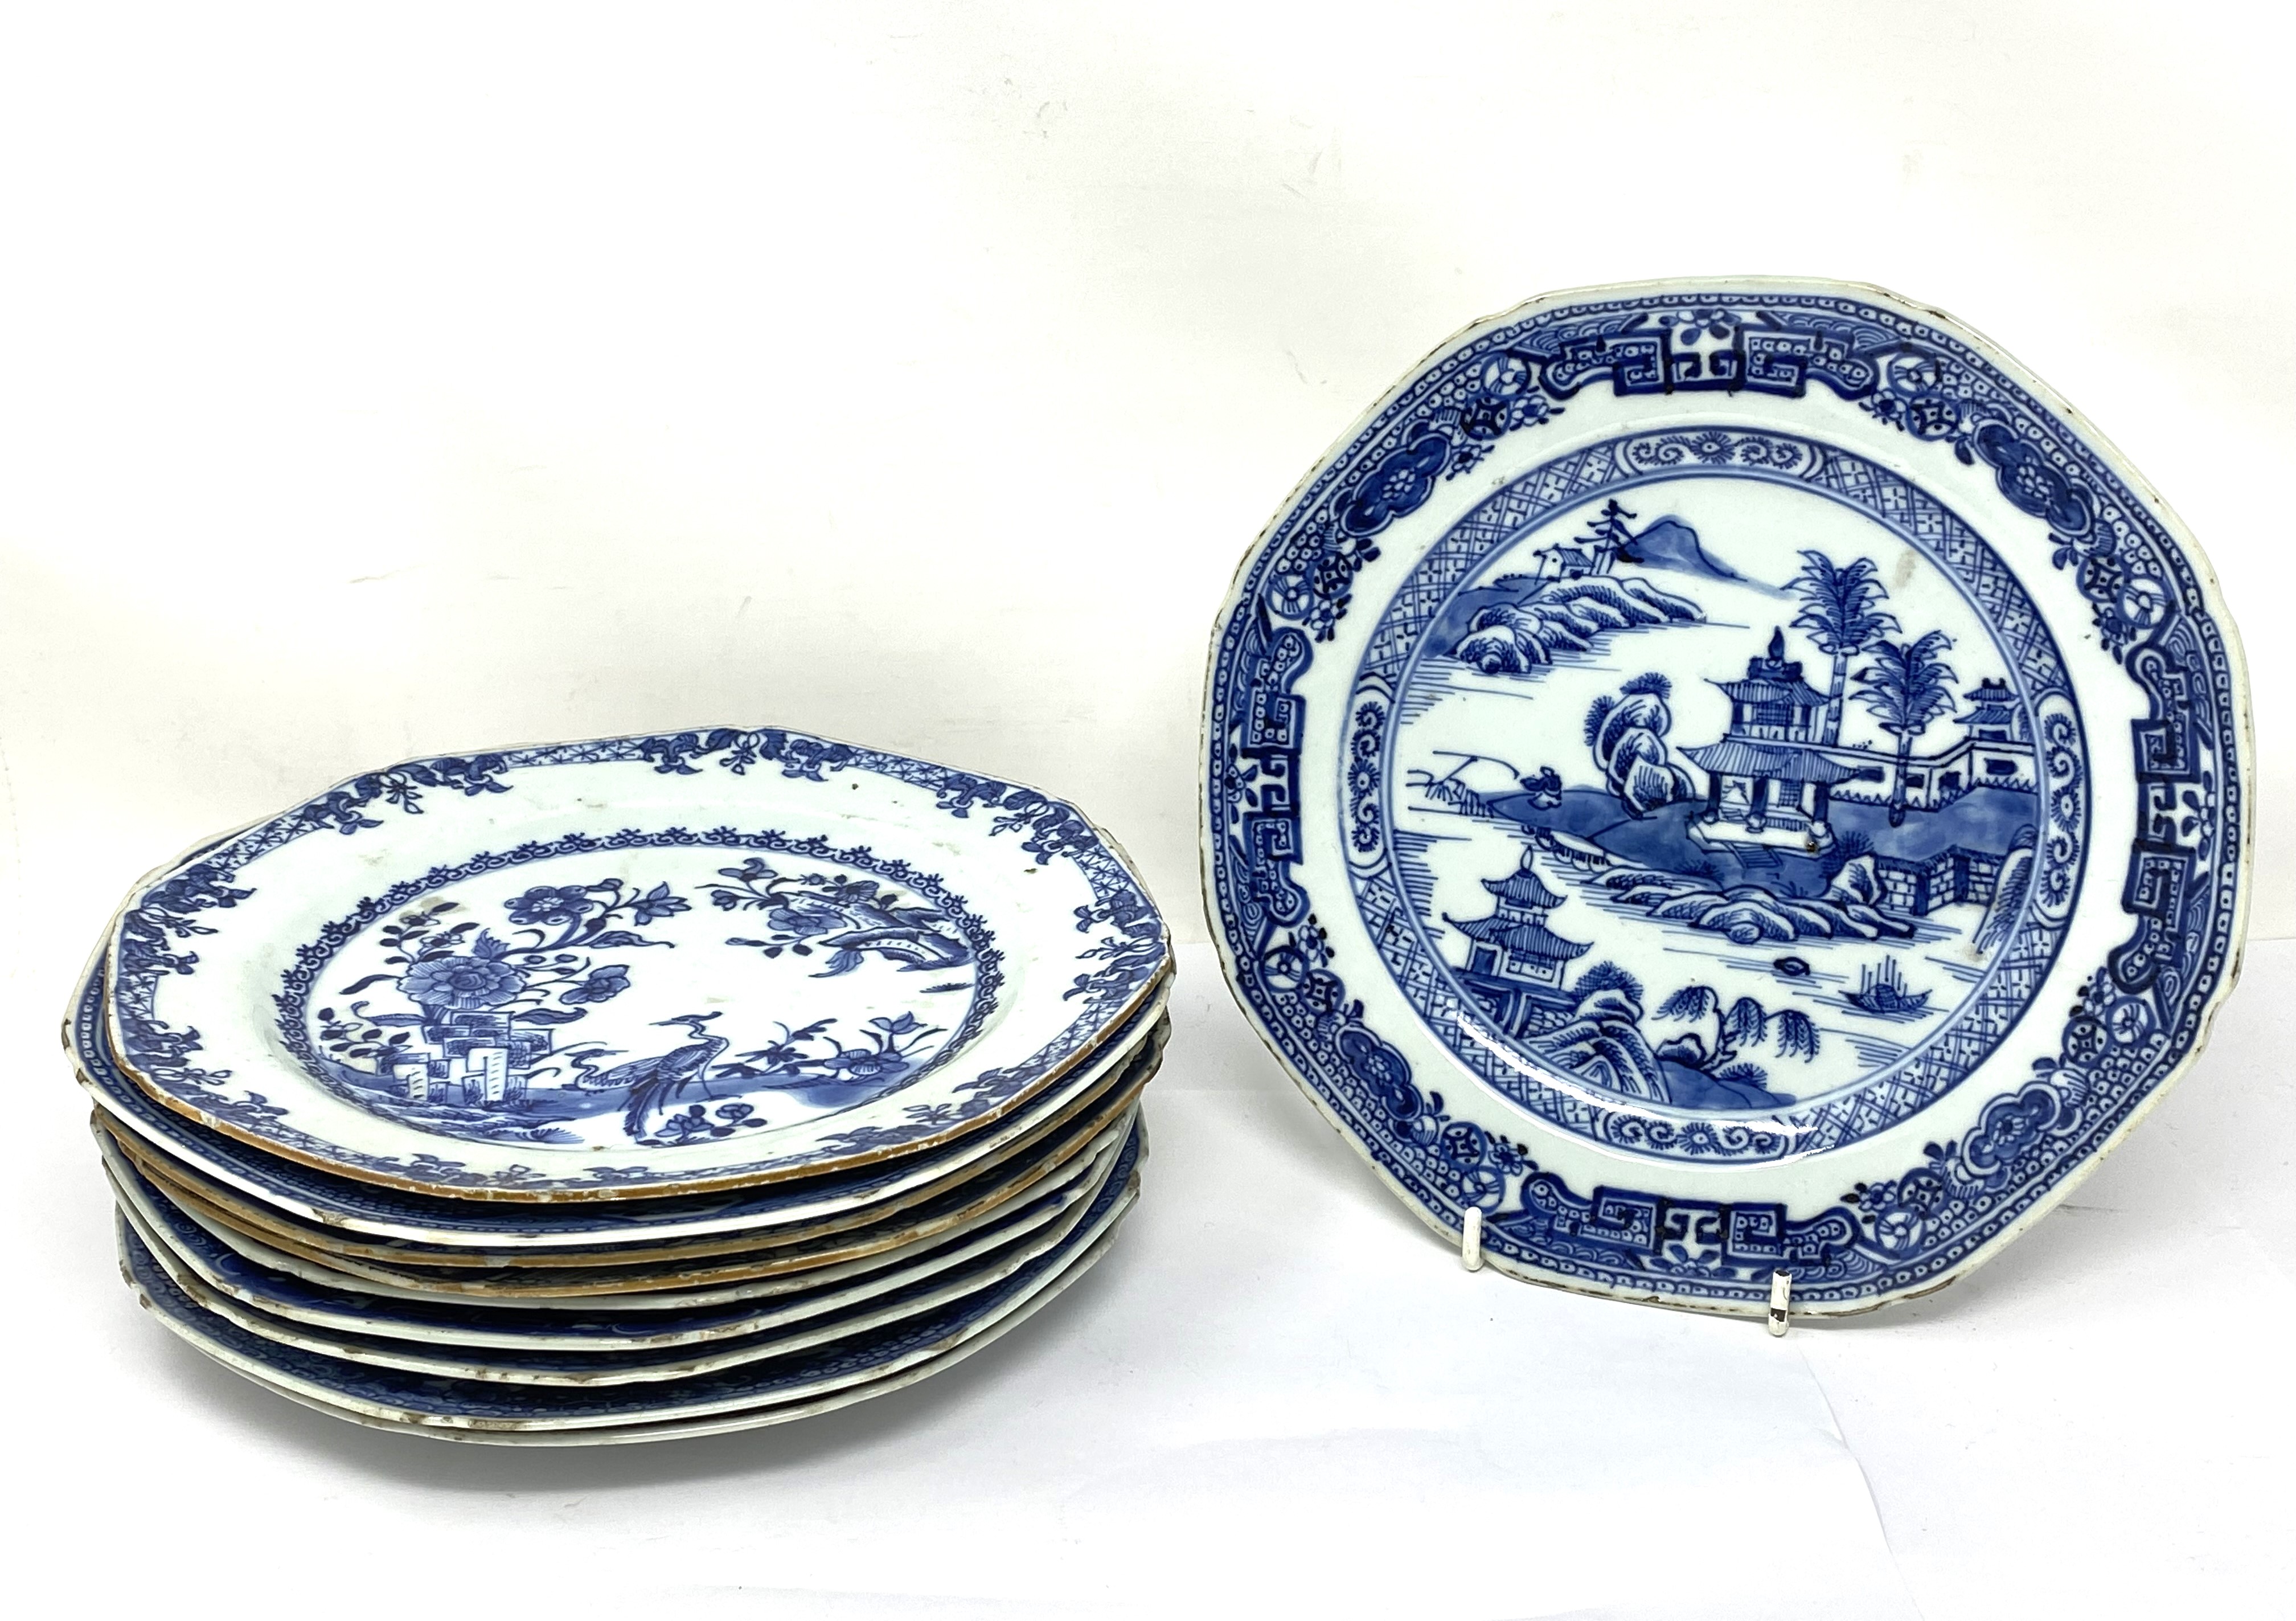 TEN CHINESE EXPORT BLUE AND WHITE DINNER PLATES, 18TH CENTURY